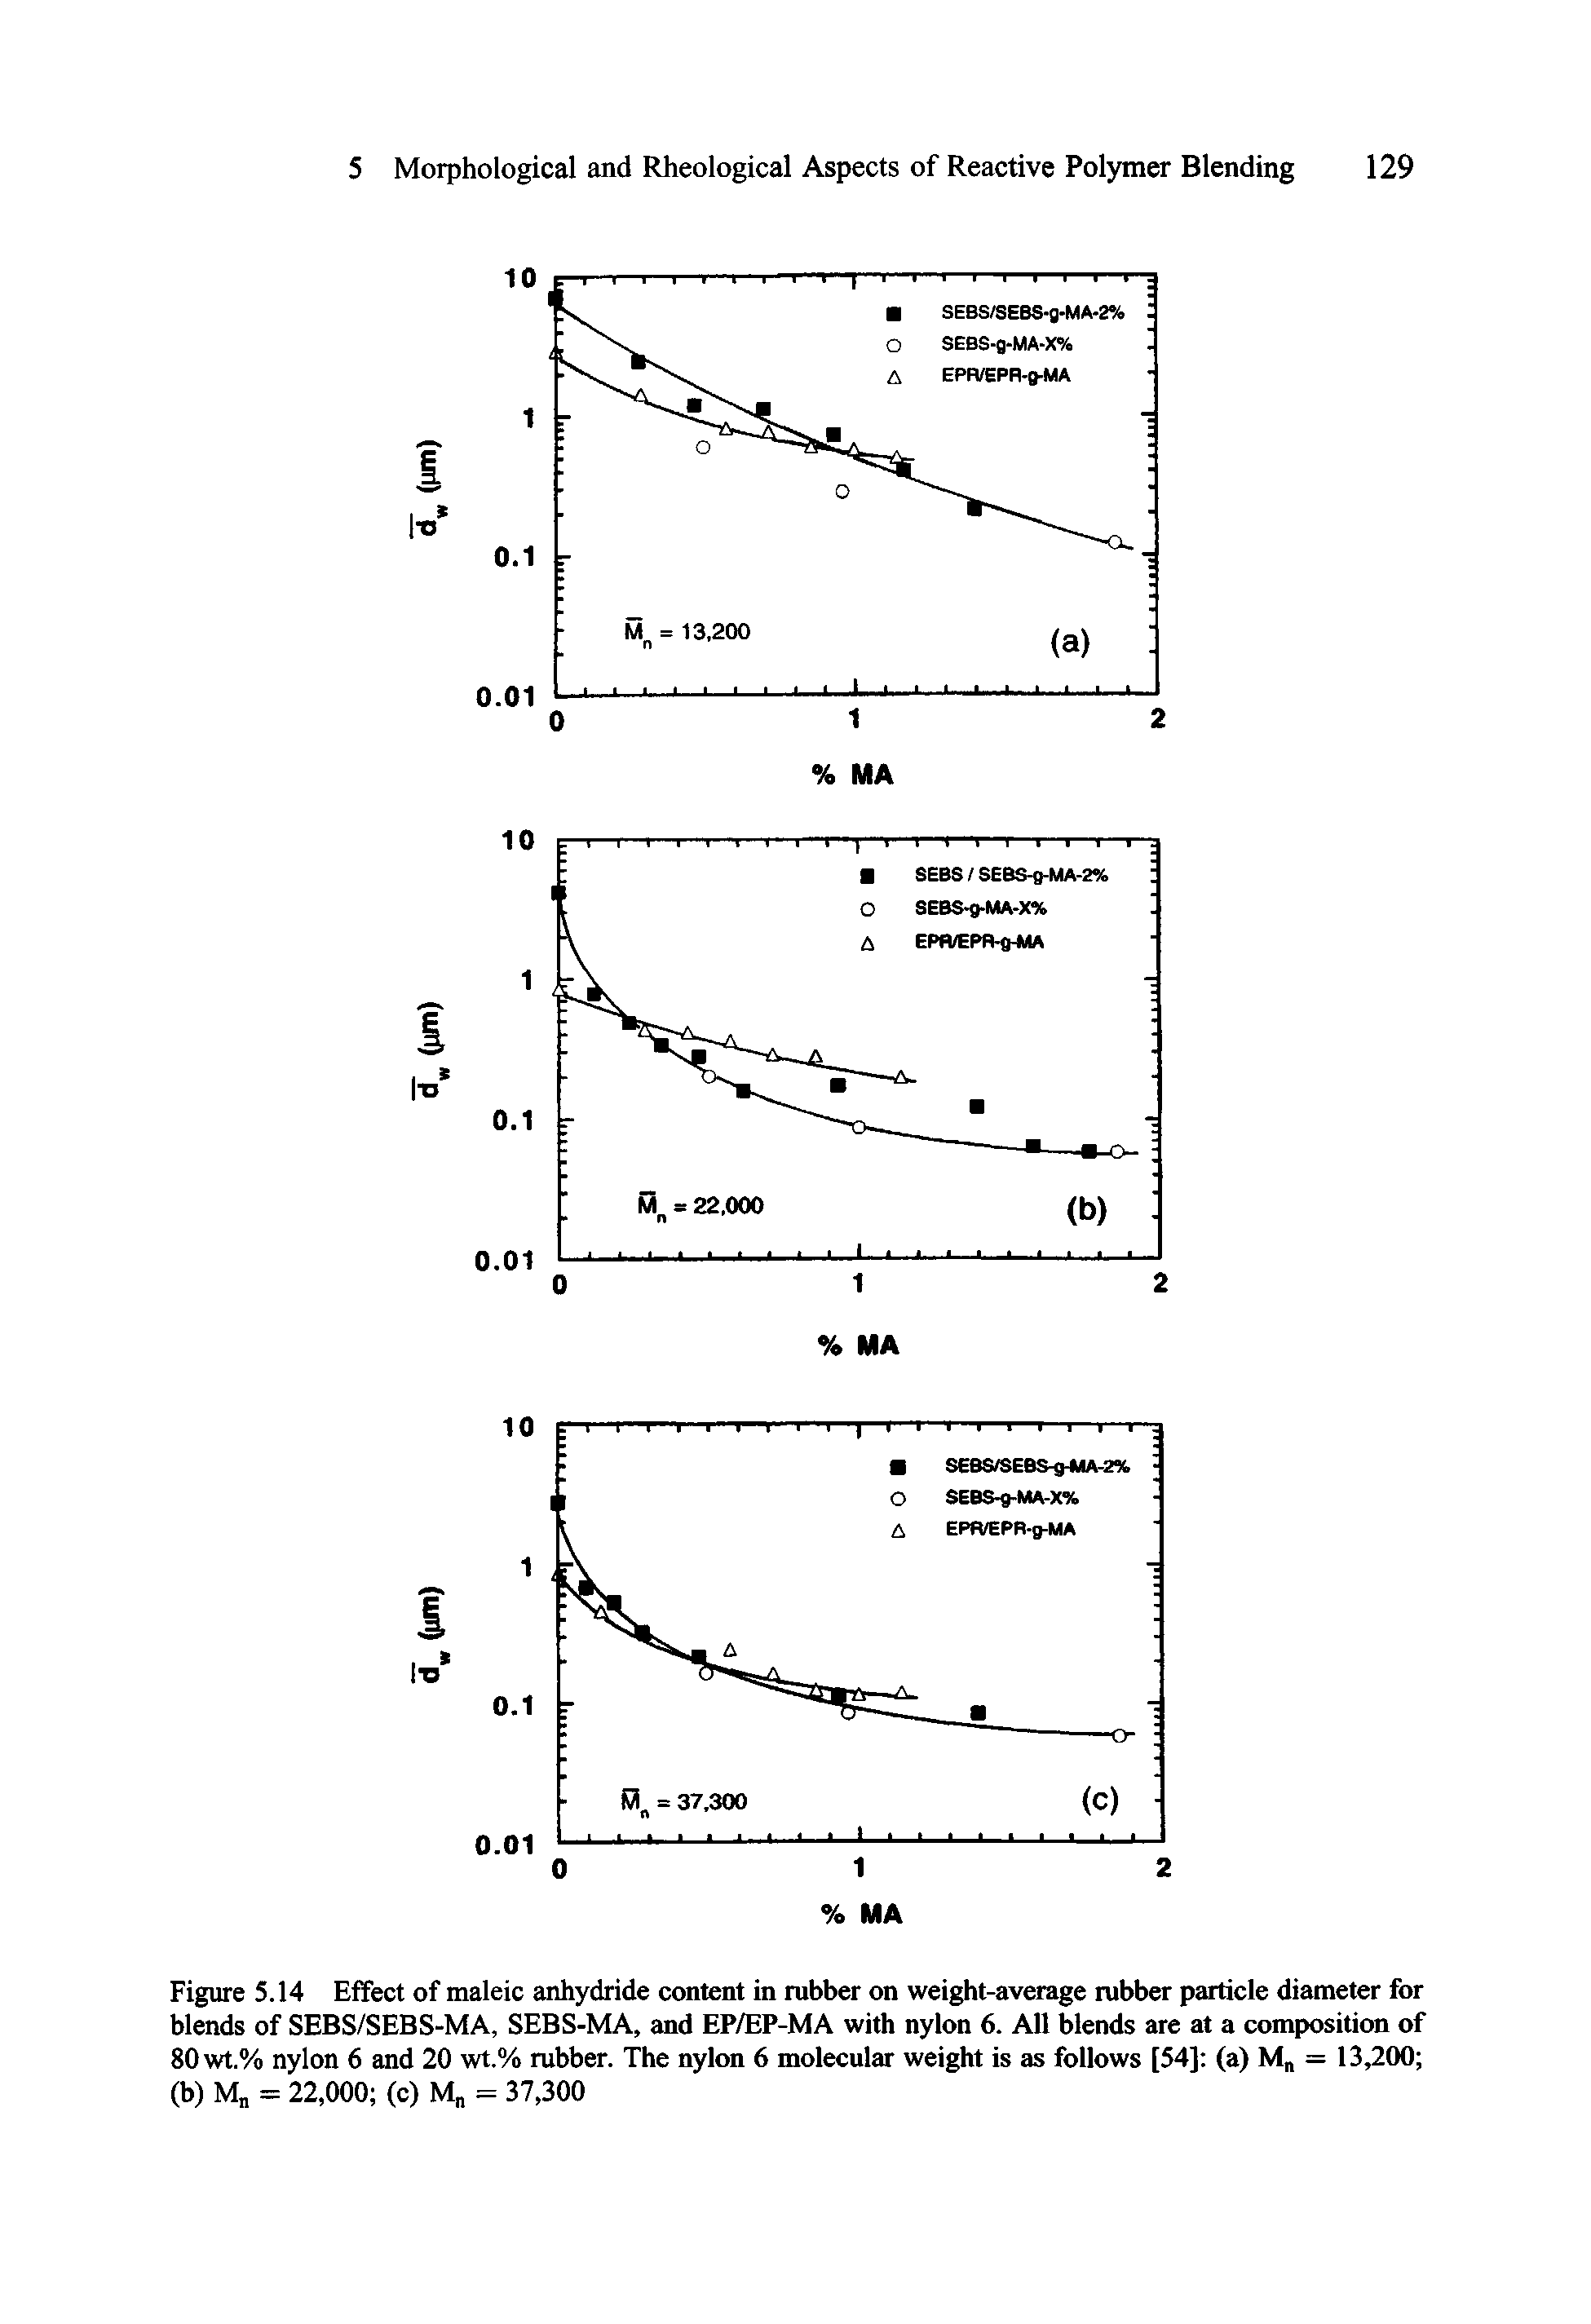 Figure 5.14 Effect of maleic anhydride content in rubber on weight-average rubber particle diameter for blends of SEBS/SEBS-MA, SEBS-MA, and EP/EP-MA with nylon 6. All blends are at a composition of 80wt.% nylon 6 and 20 wt.% mbber. The nylon 6 molecular weight is as follows [54] (a) M — 13 00 (b) M, = 22,000 (c) M = 37,300...